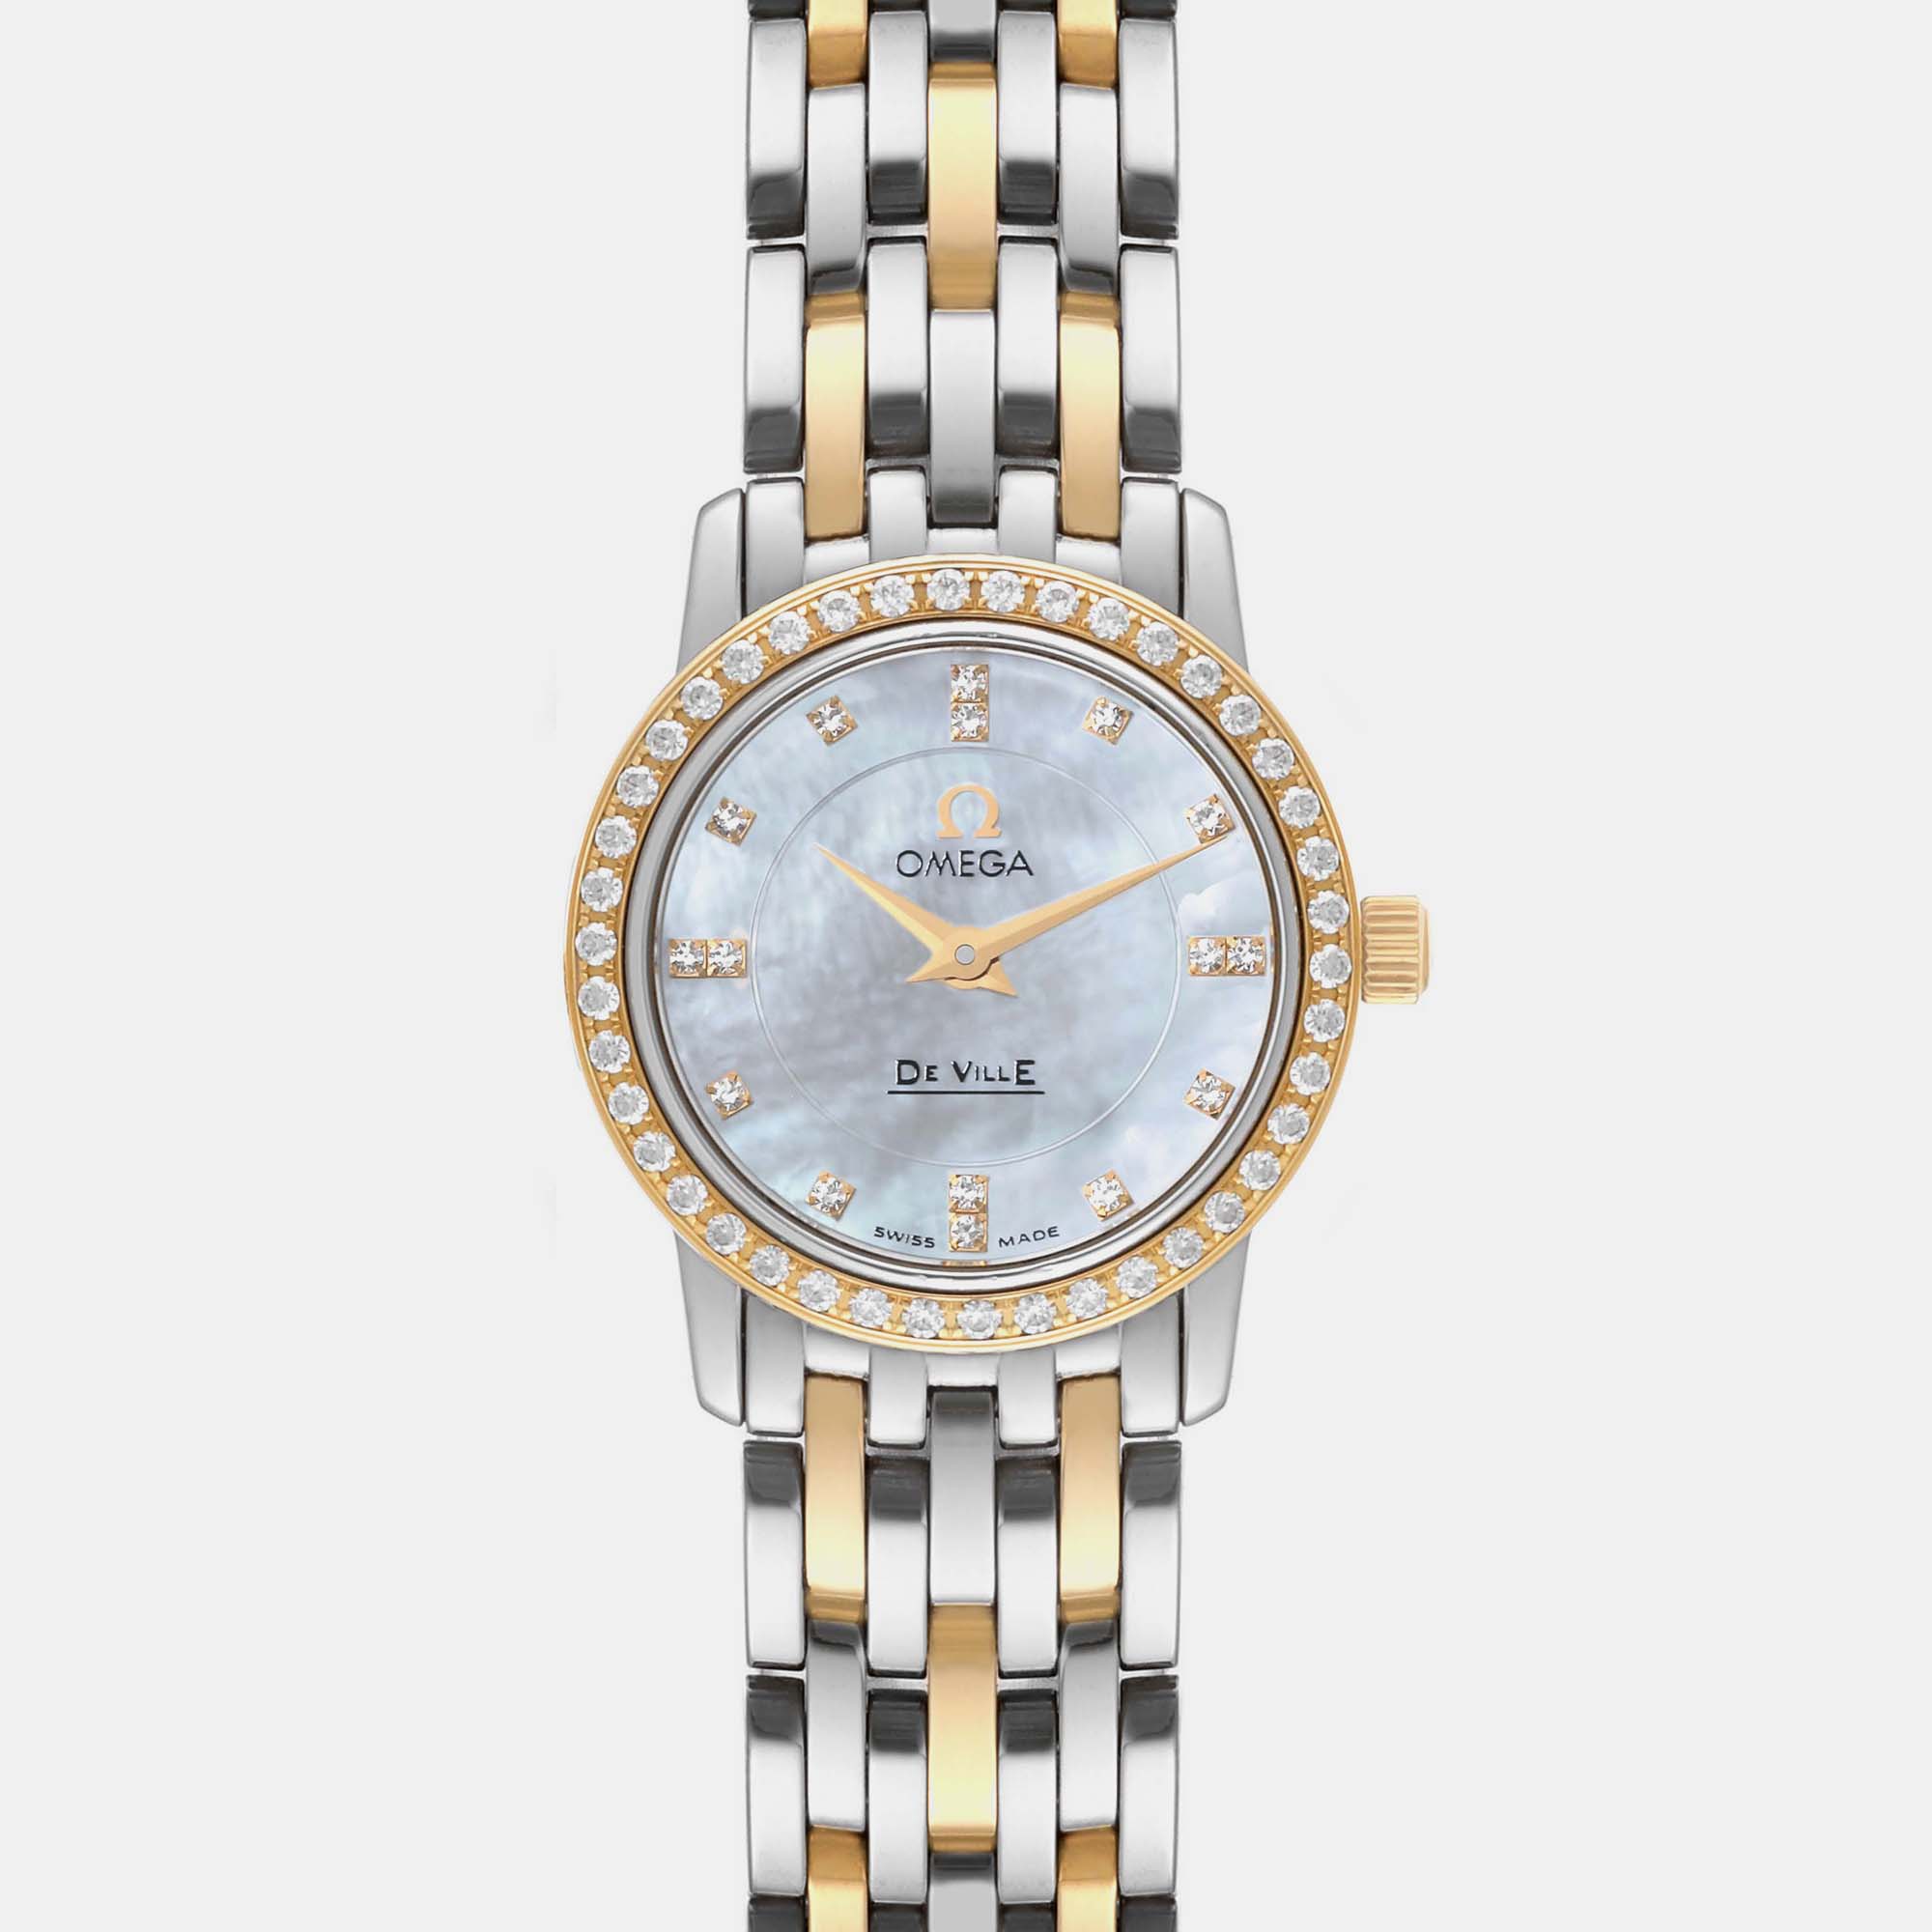 Omega Mother Of Pearl 18k Yellow Gold And Stainless Steel De Ville Prestige 4375.75 Quartz Women's Wristwatch 22 Mm